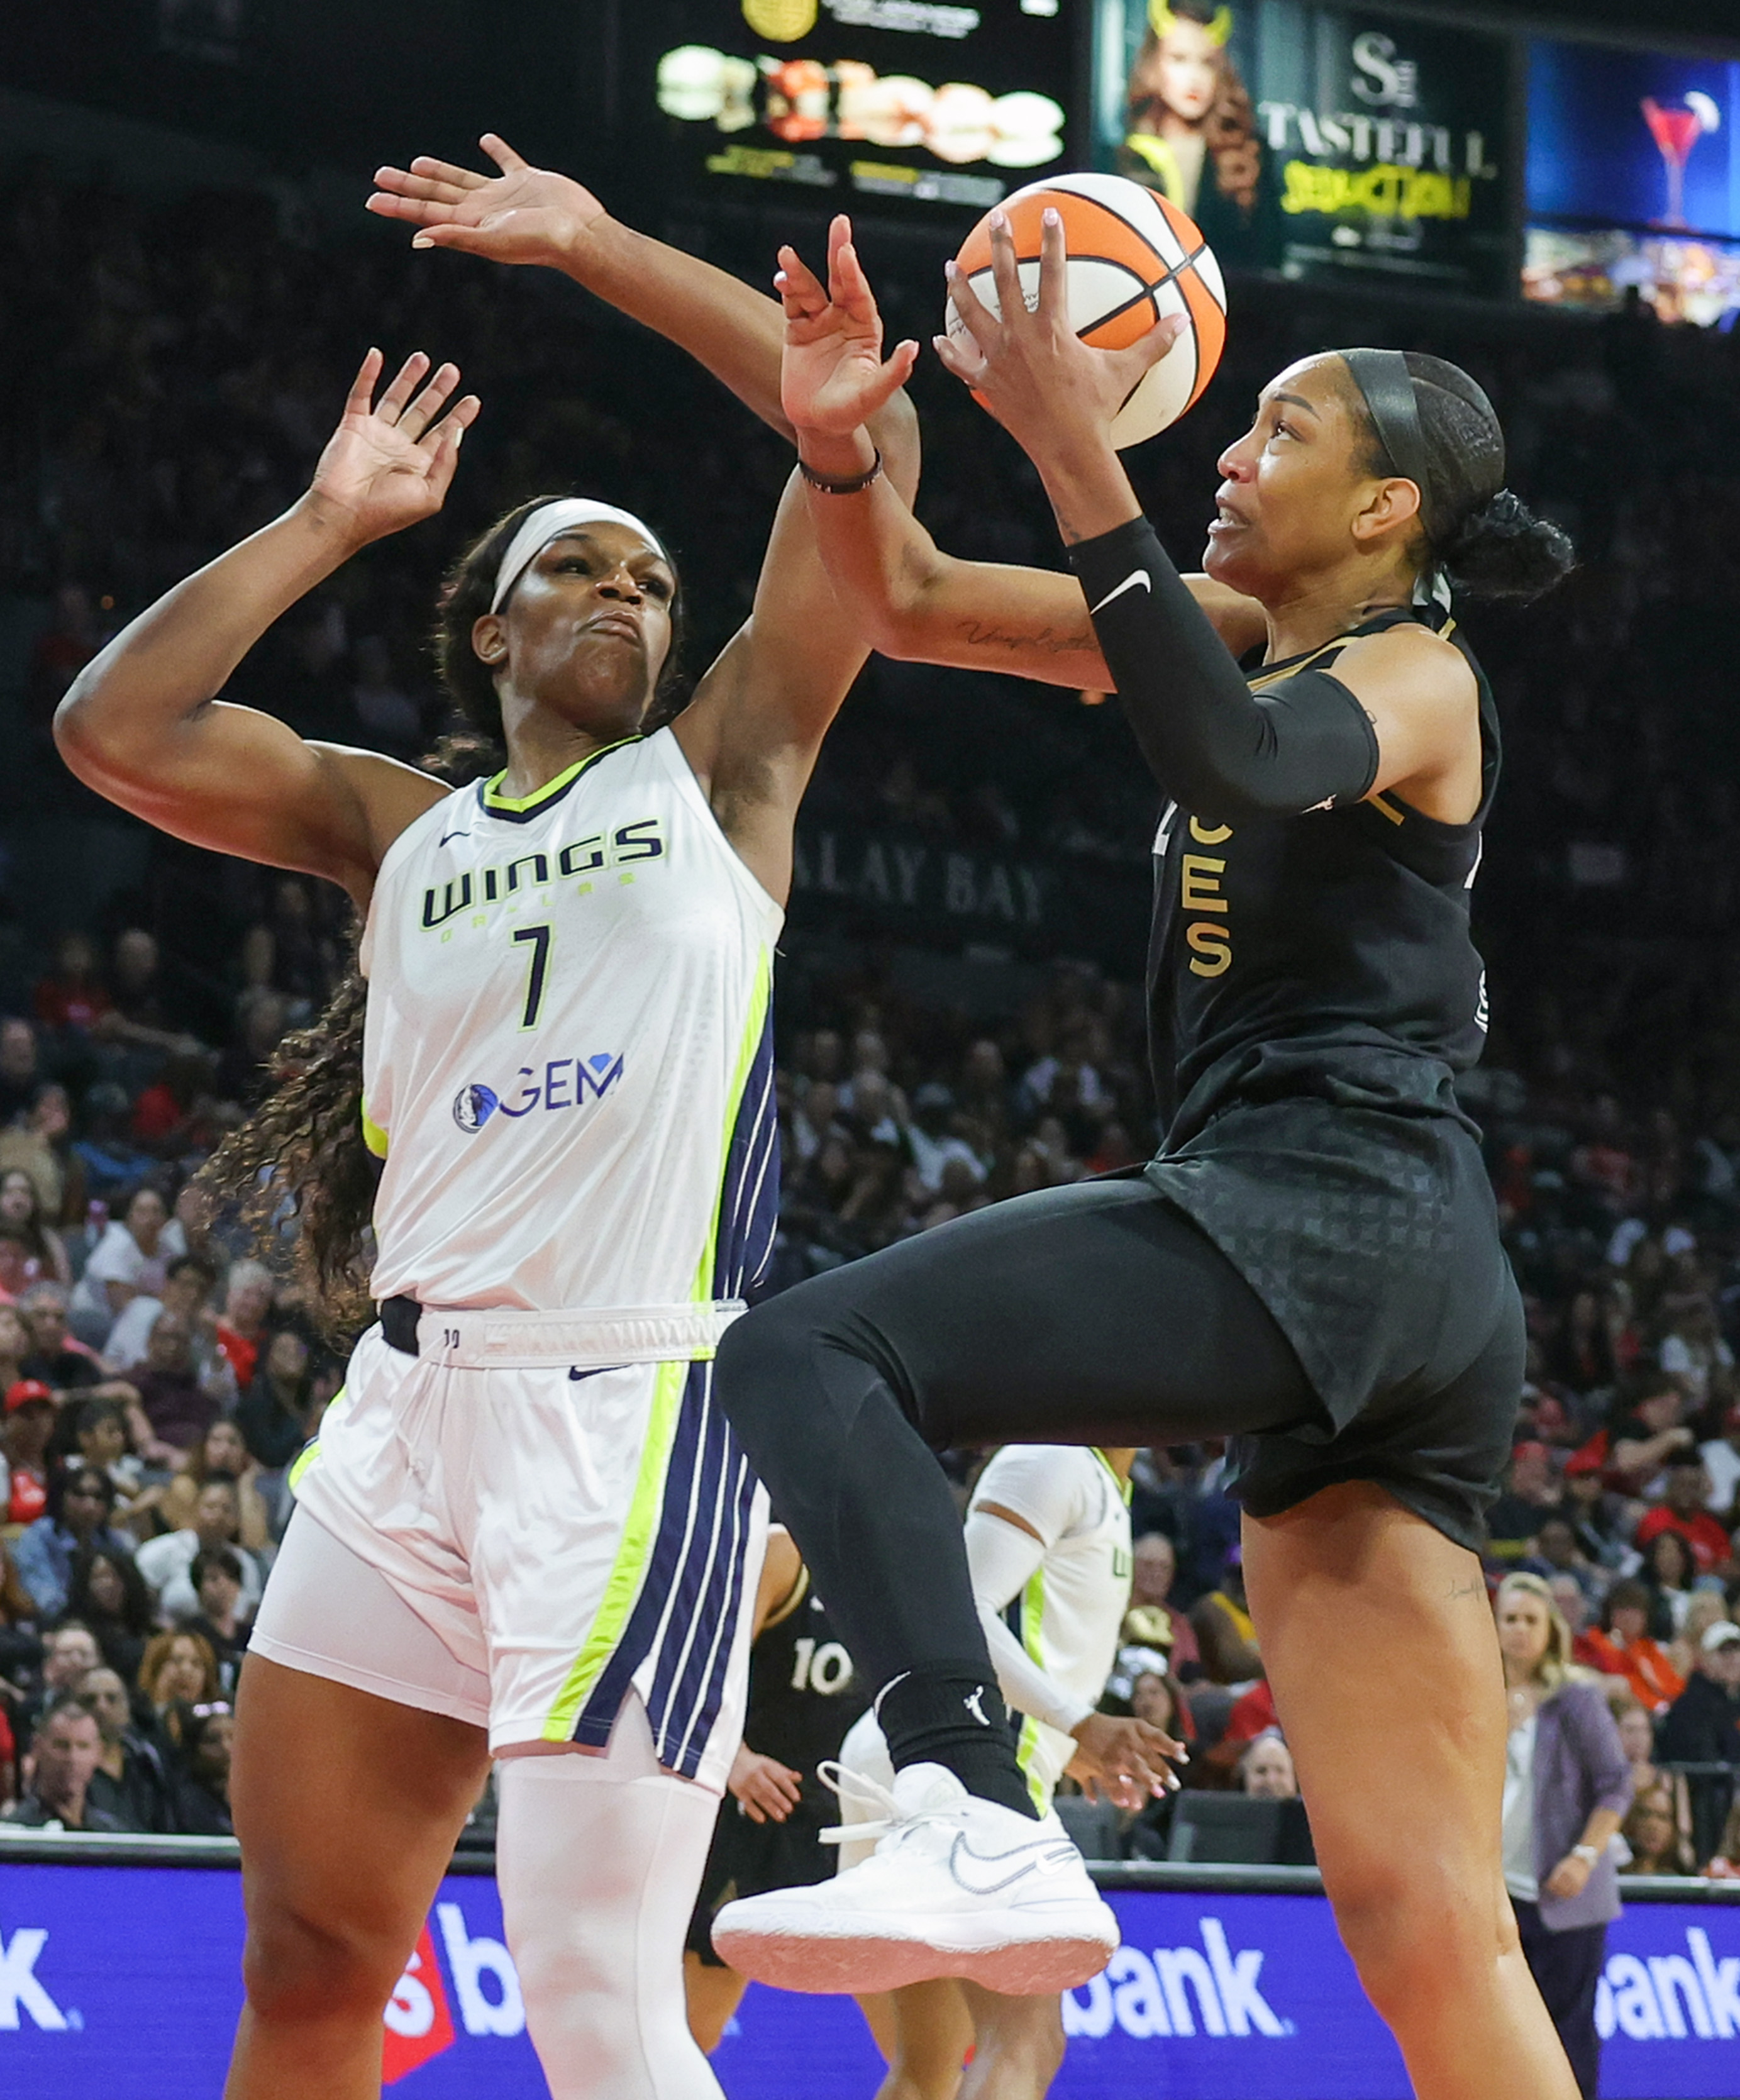 Rutgers great Kahleah Copper wins WNBA title and Finals MVP - On the Banks